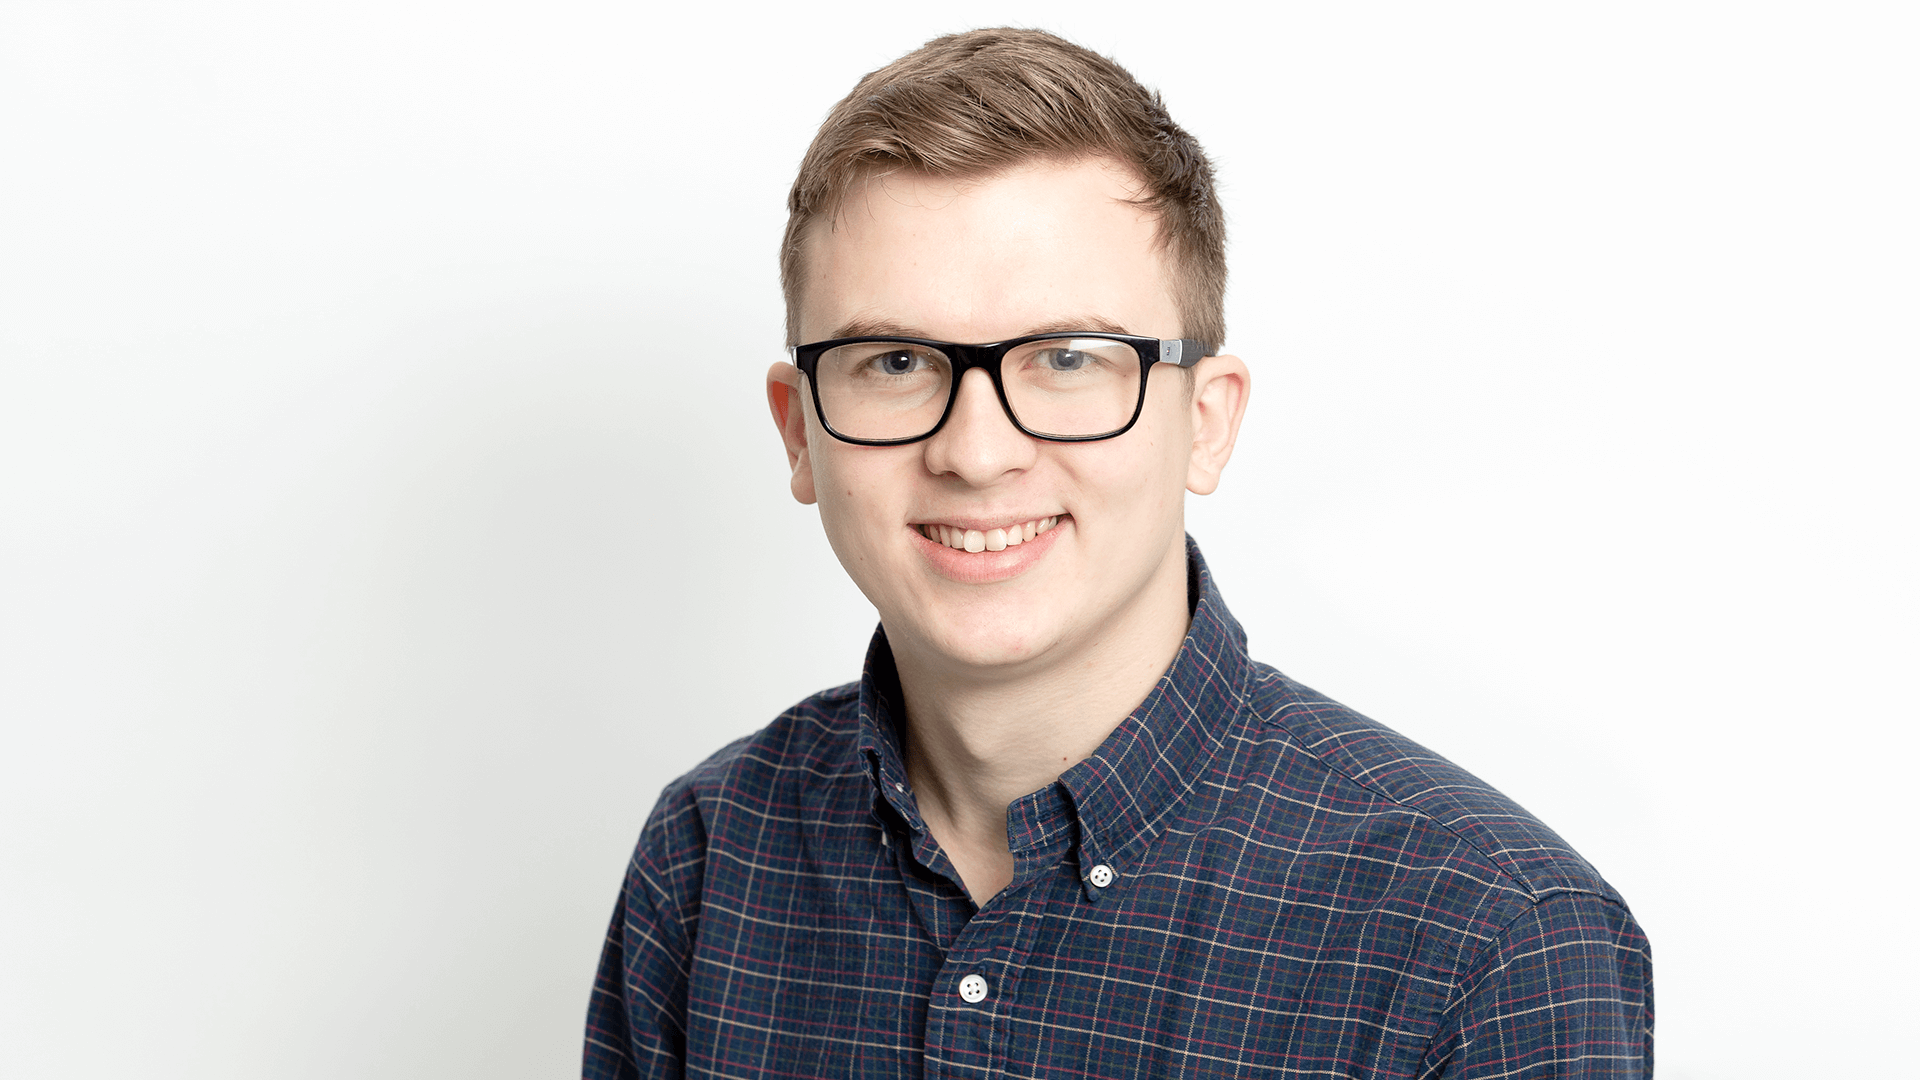 Thomas Bromley reflects on his summer placement at Urban Edge